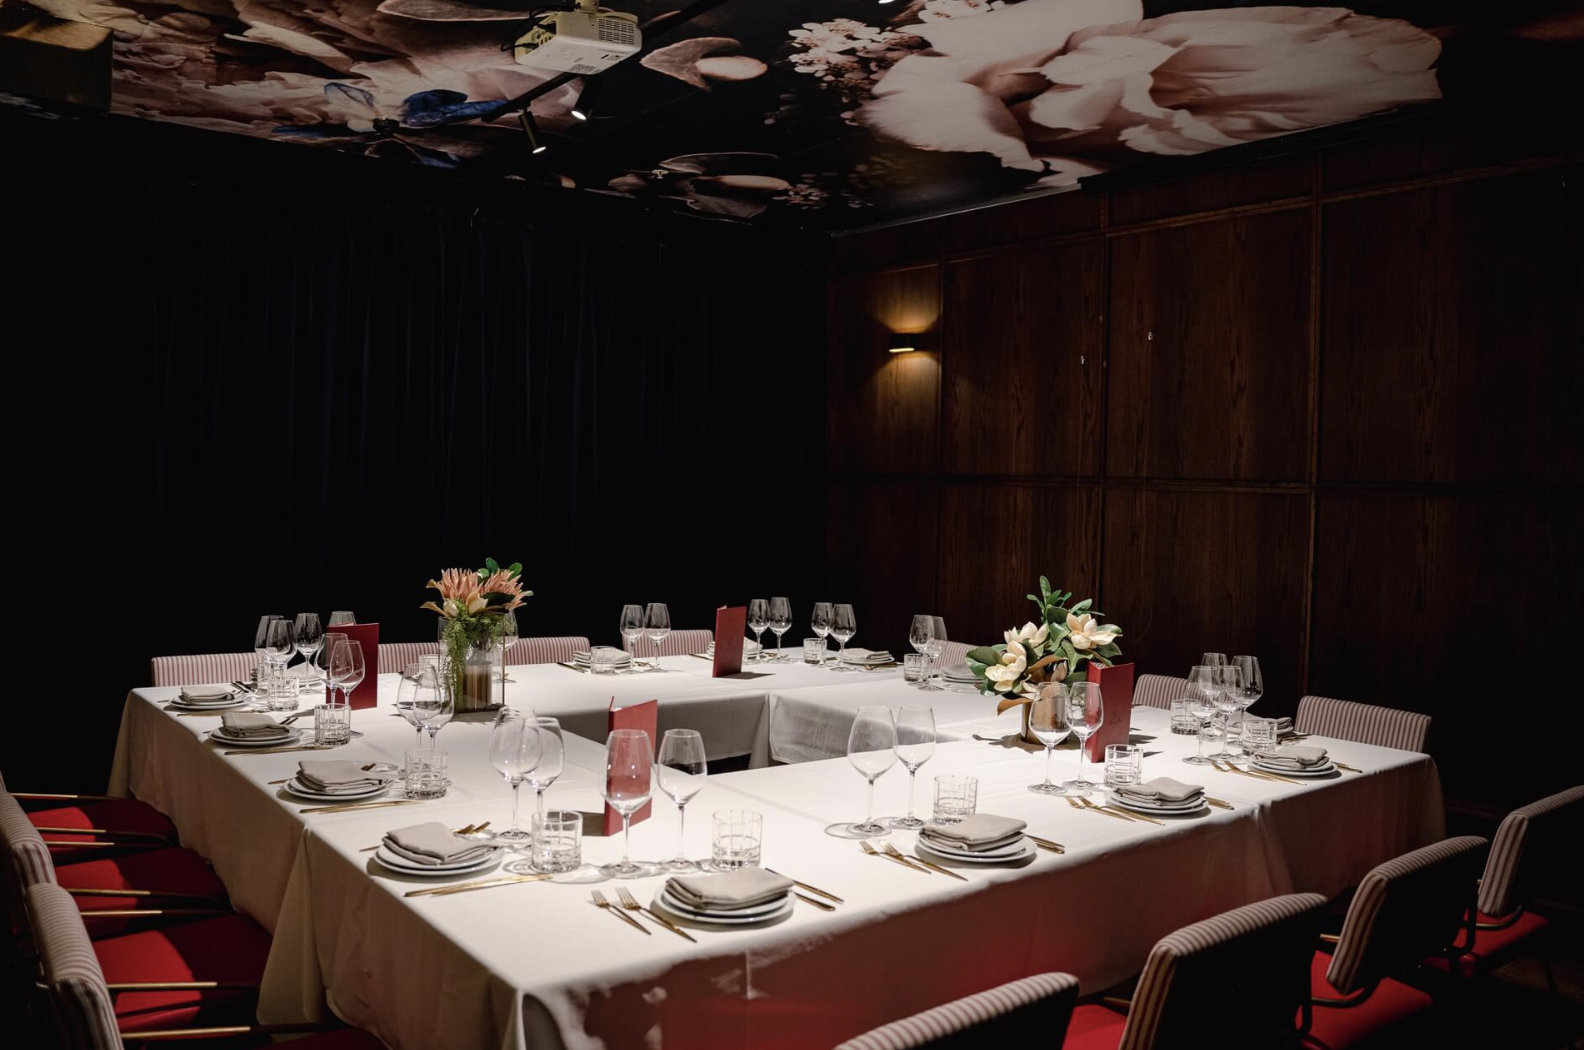 Bottega Coco's wine tasting dinners are held in an upstairs private dining room.